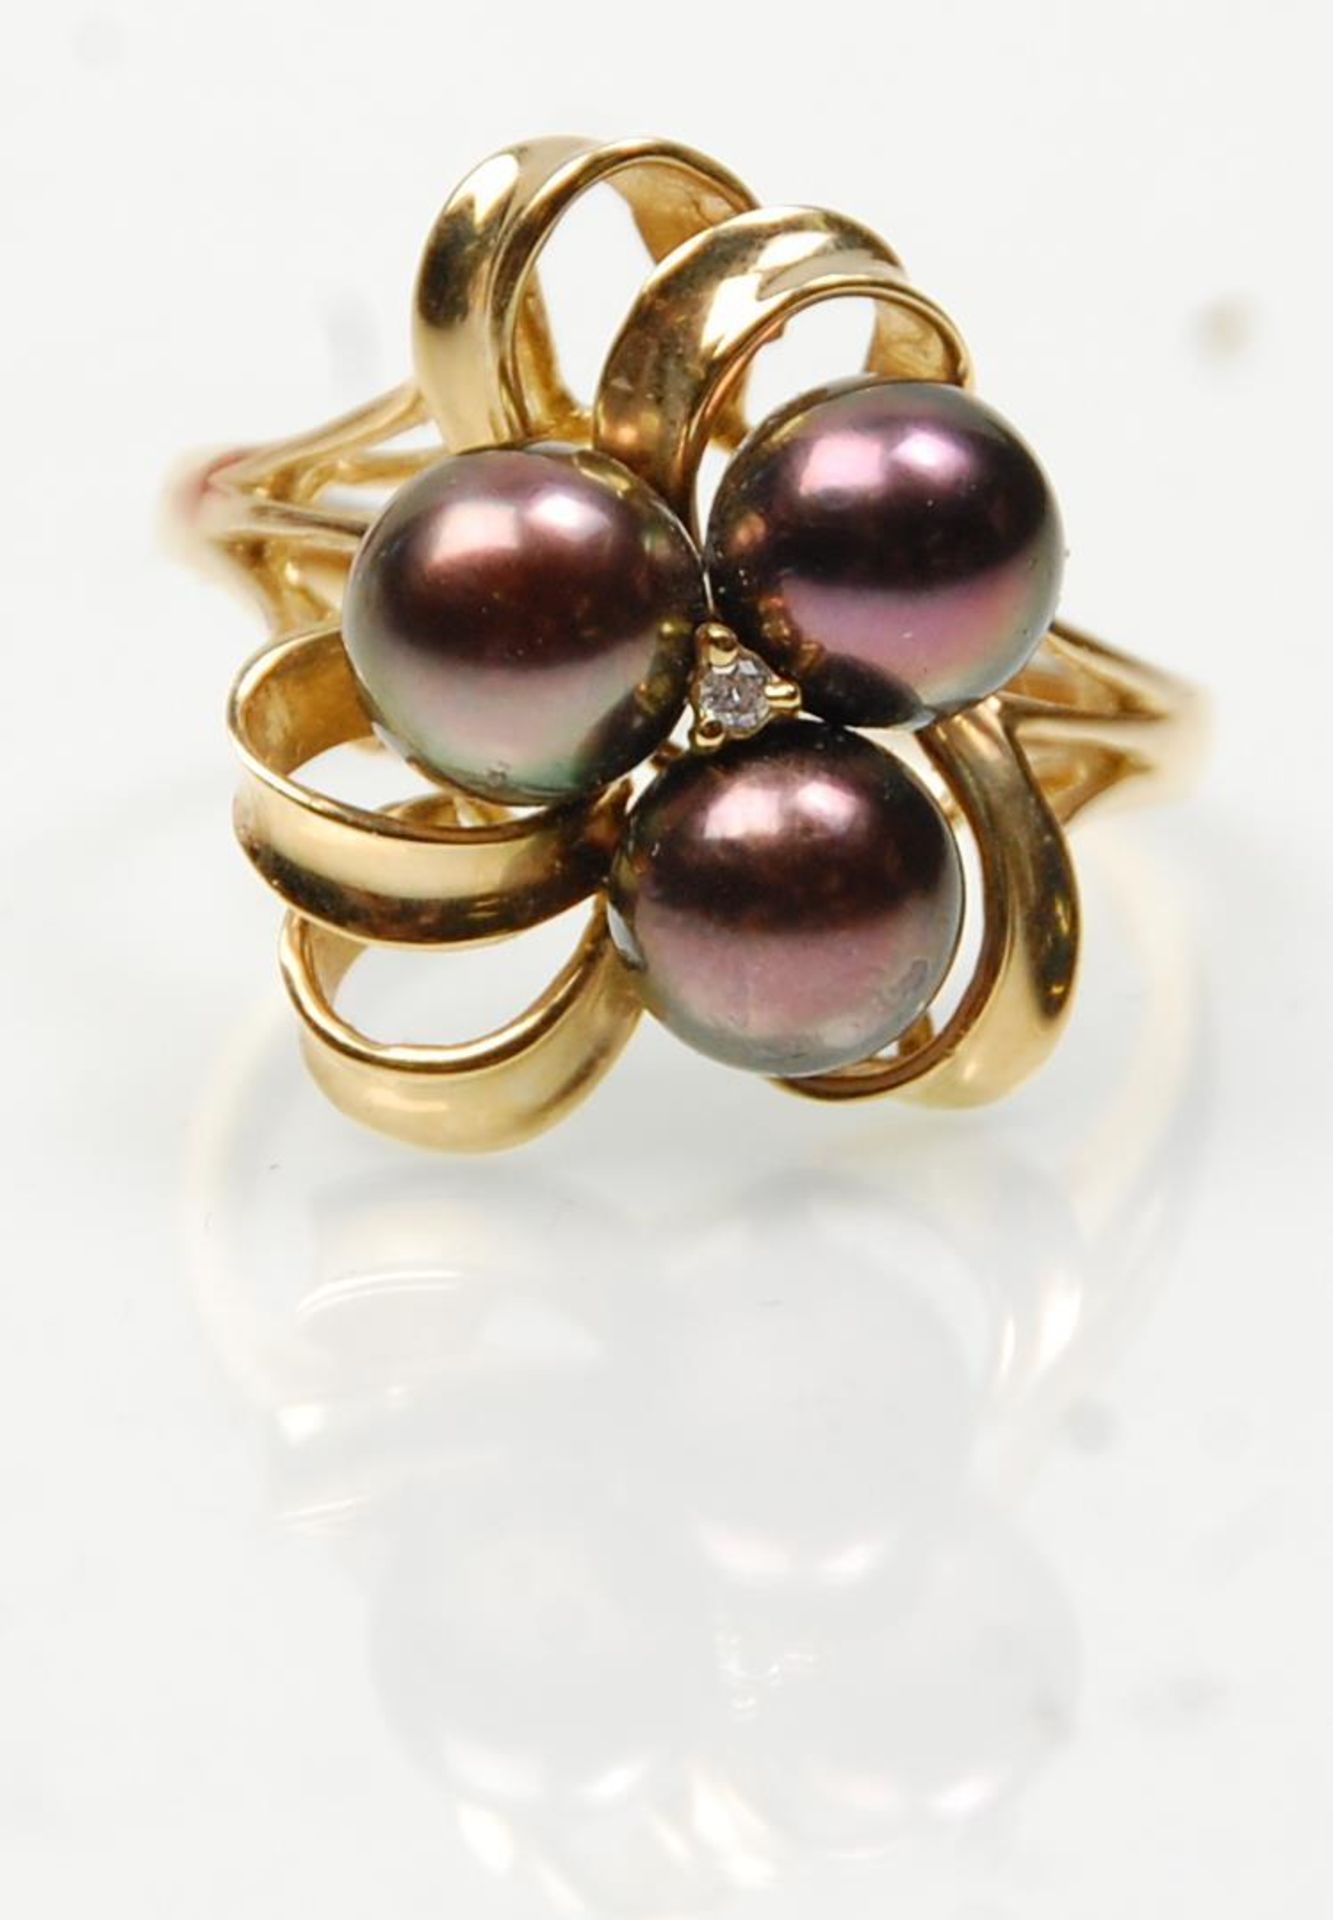 A stamped 14ct gold ring having a twist design set with three pearls and a central diamond. Weight